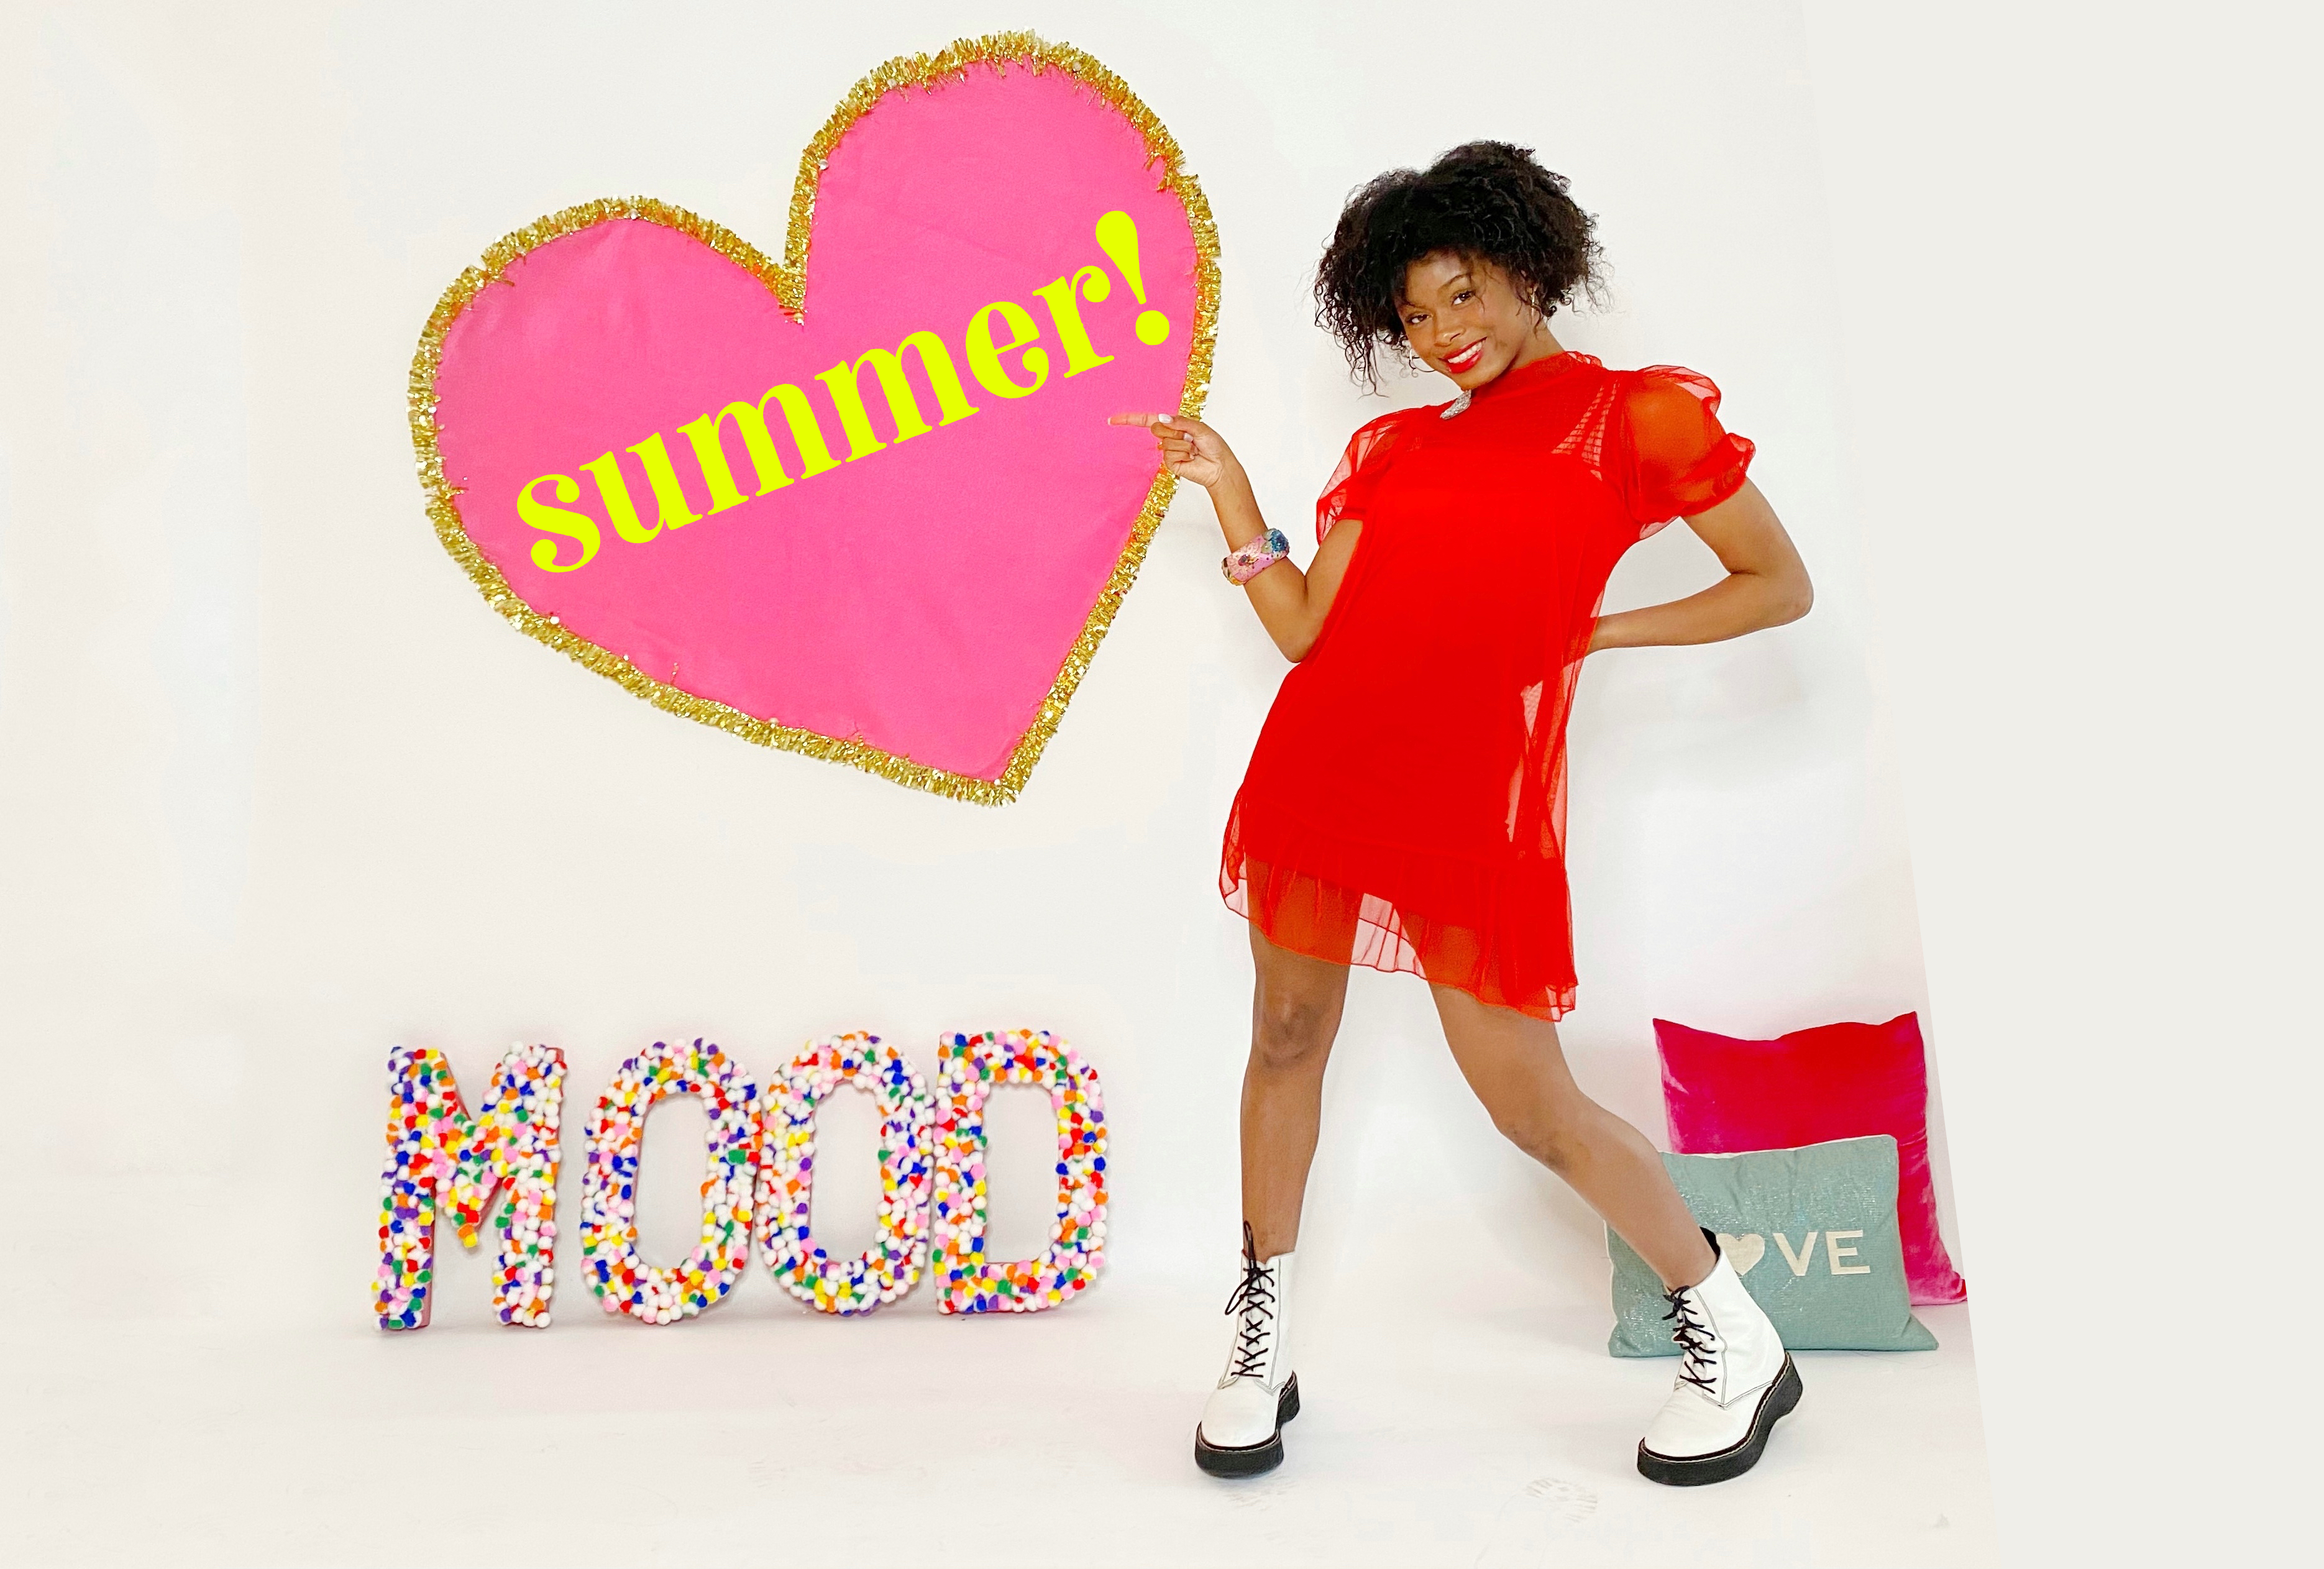 Dancer posing in red dress next to letters that spell out MOOD and pointing to a heart on the wall with the word summer inside it.